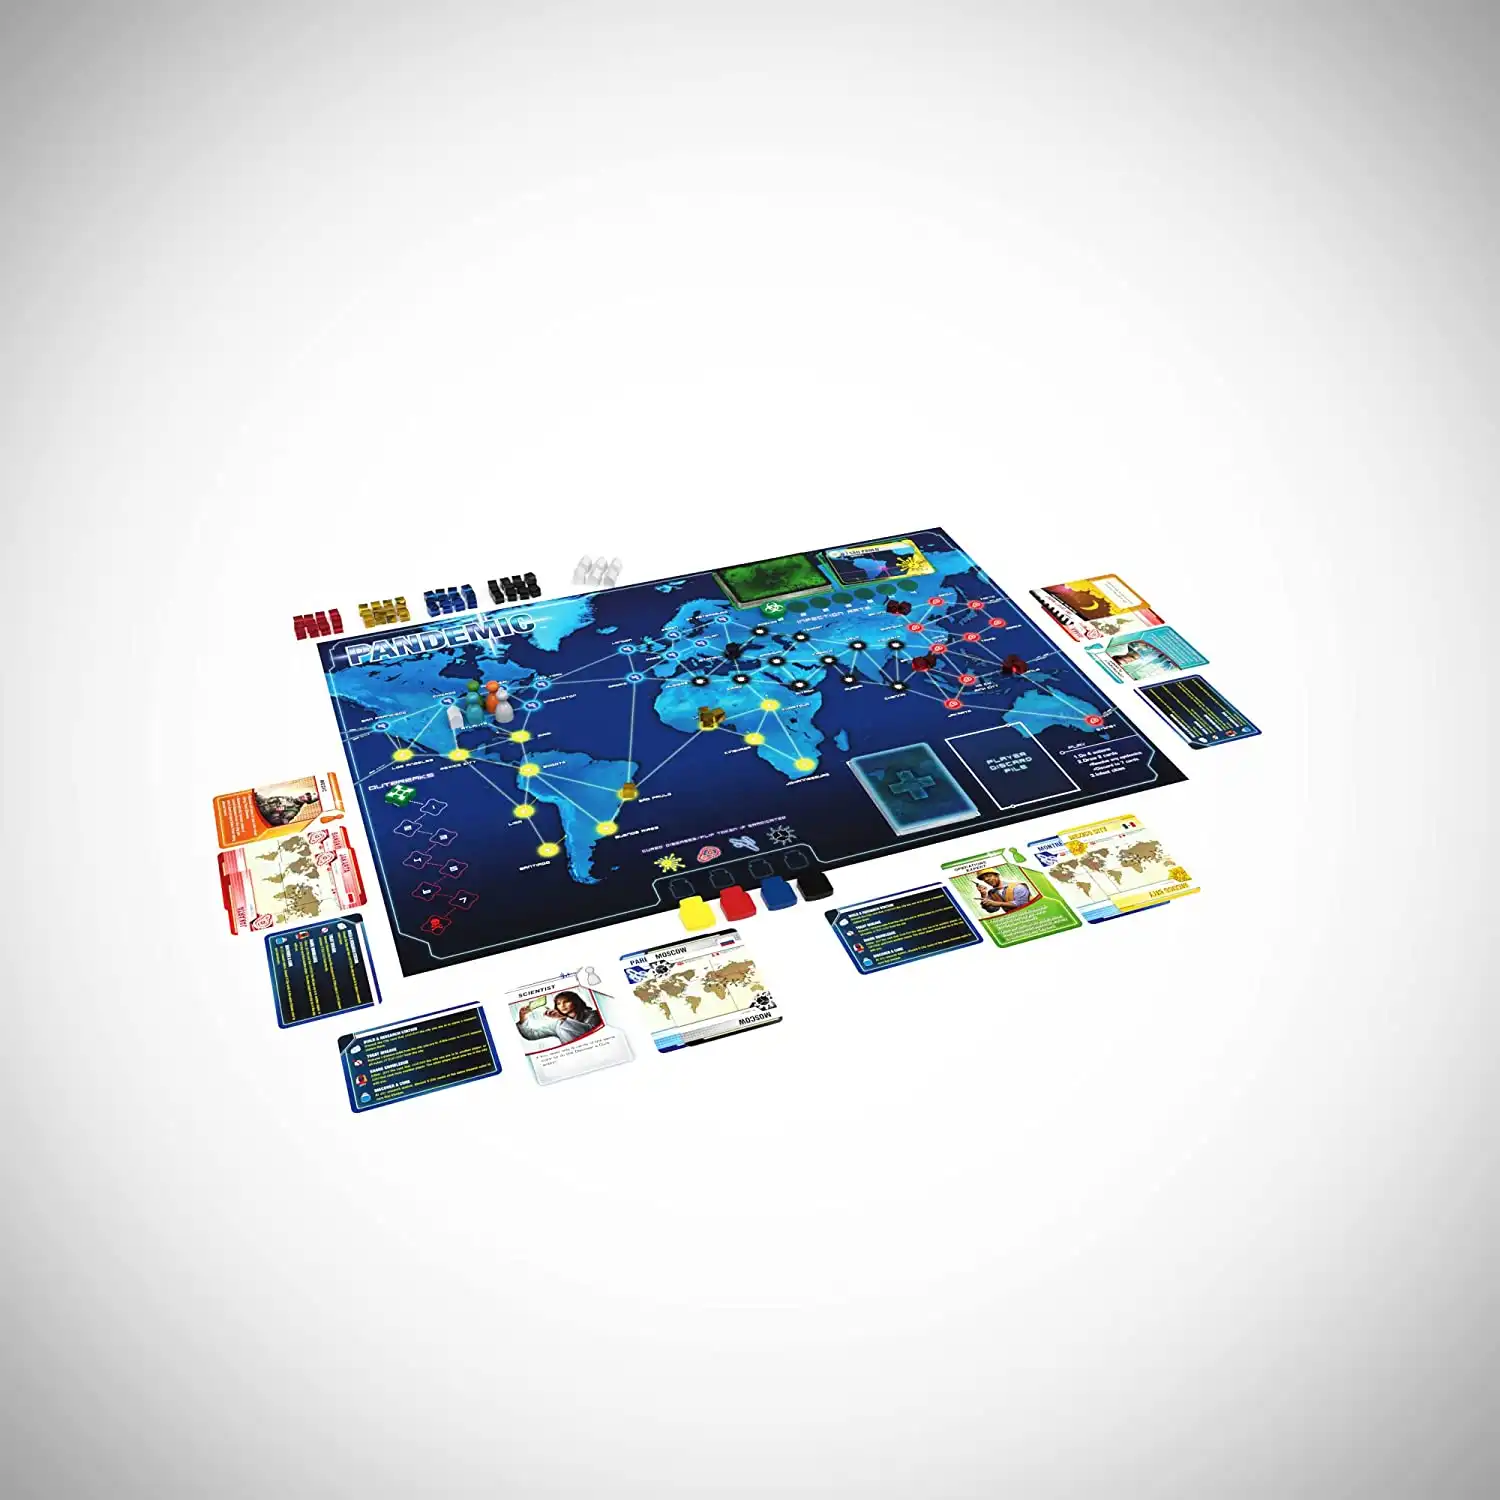 Pandemic (2008) board game components